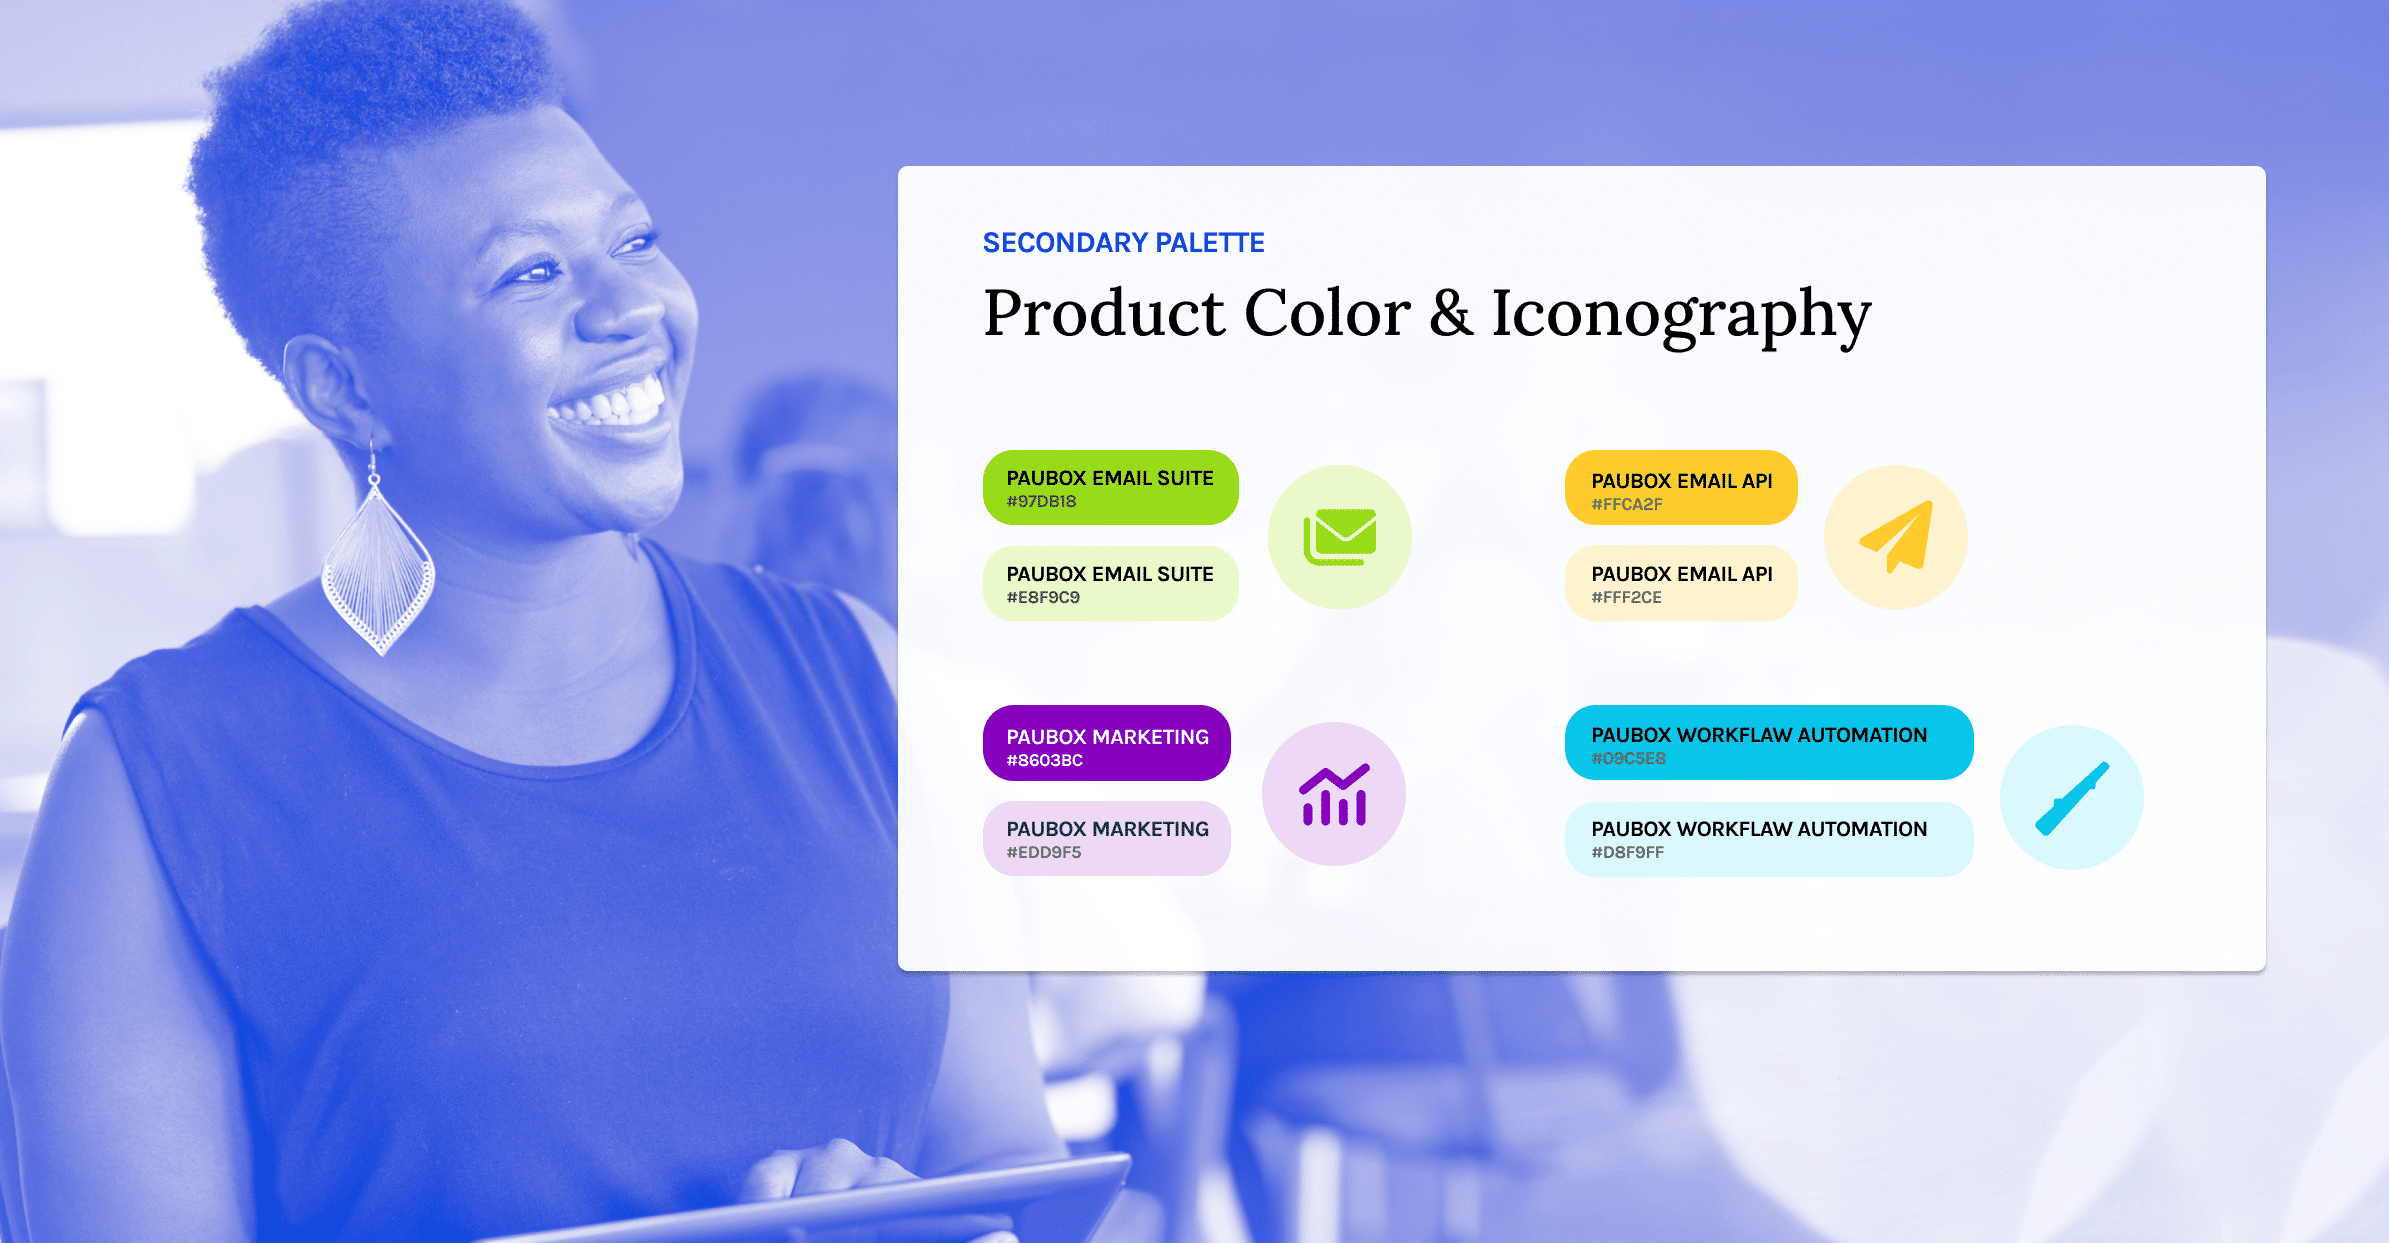 A graphic showcasing the product color and iconography set made for the Paubox brand. It is overlaid over picture of smiling woman.